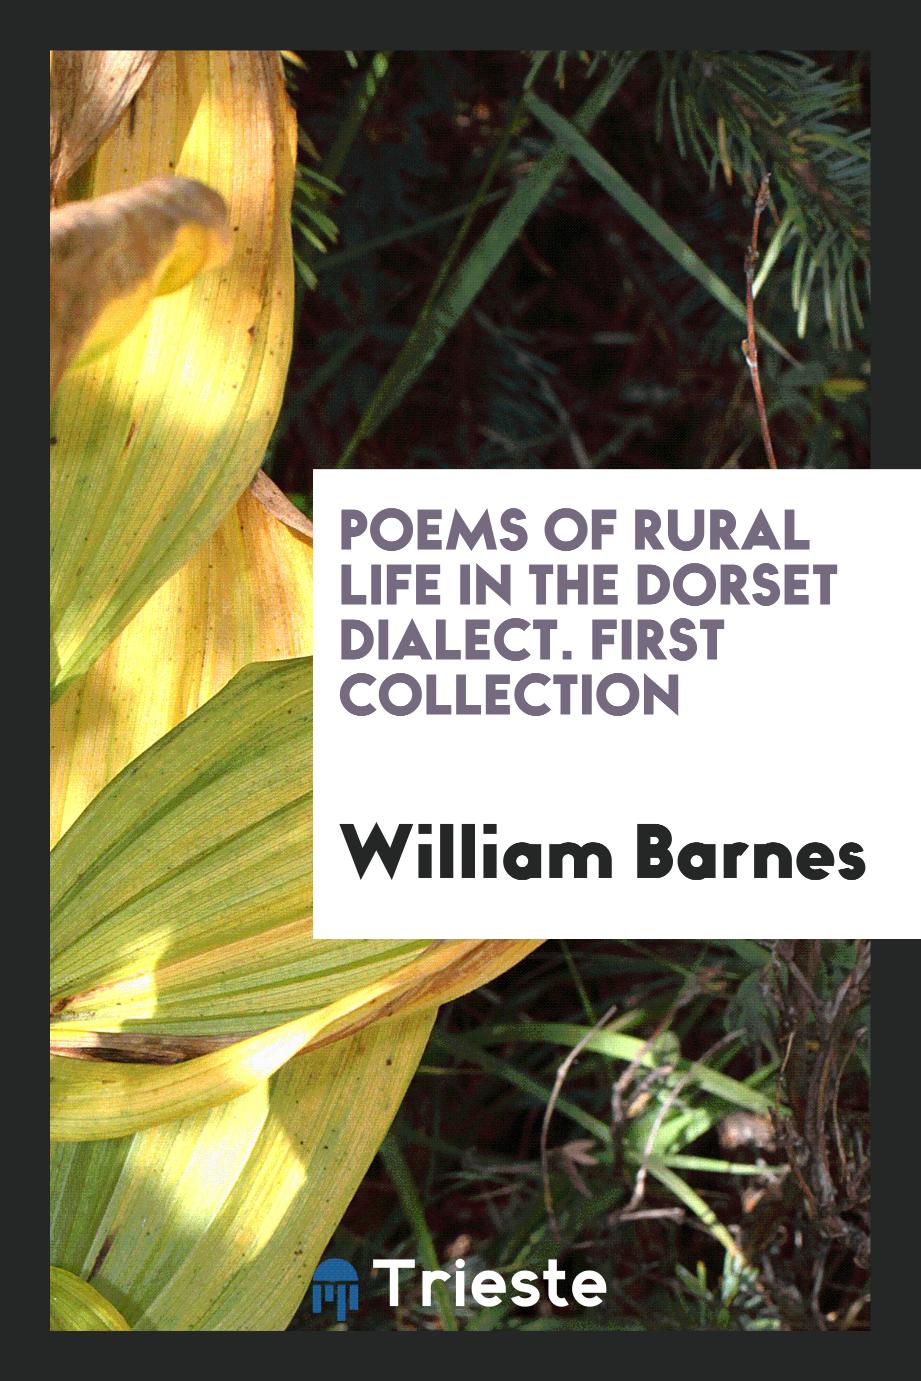 Poems of Rural Life in the Dorset Dialect. First Collection